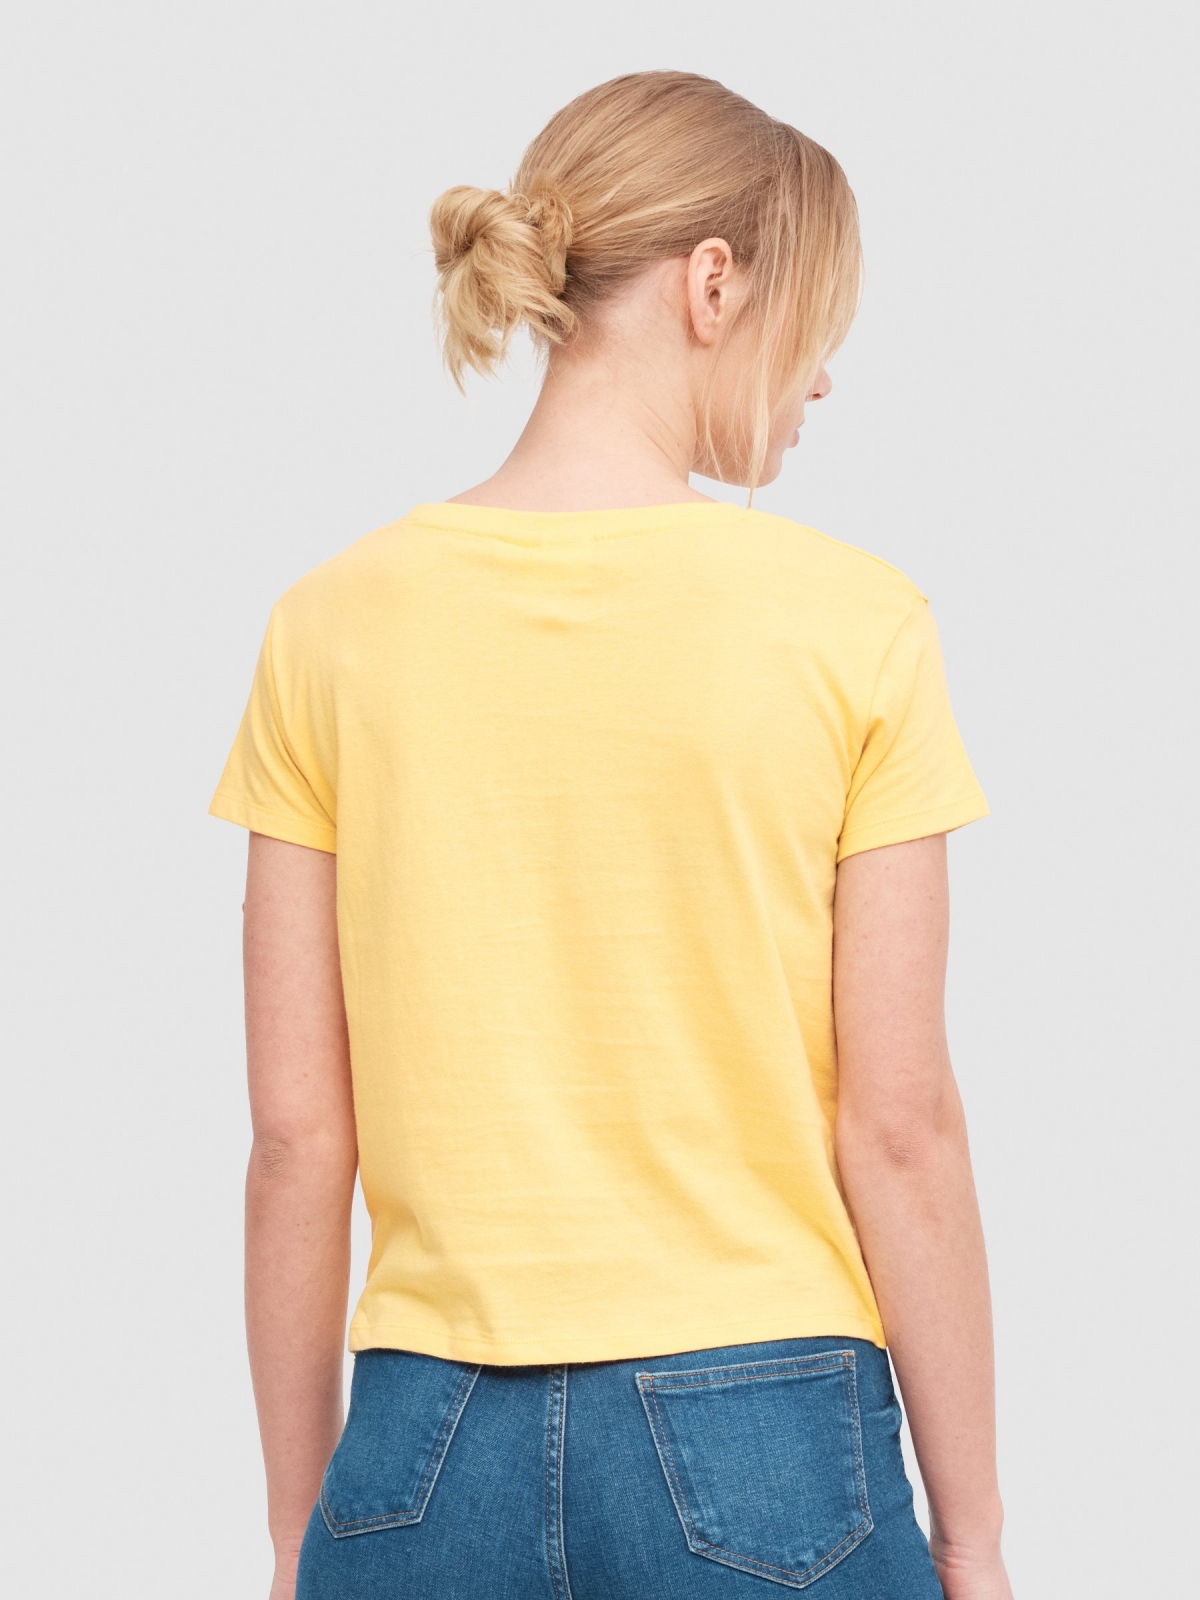 Licensed Stitch T-shirt yellow middle back view